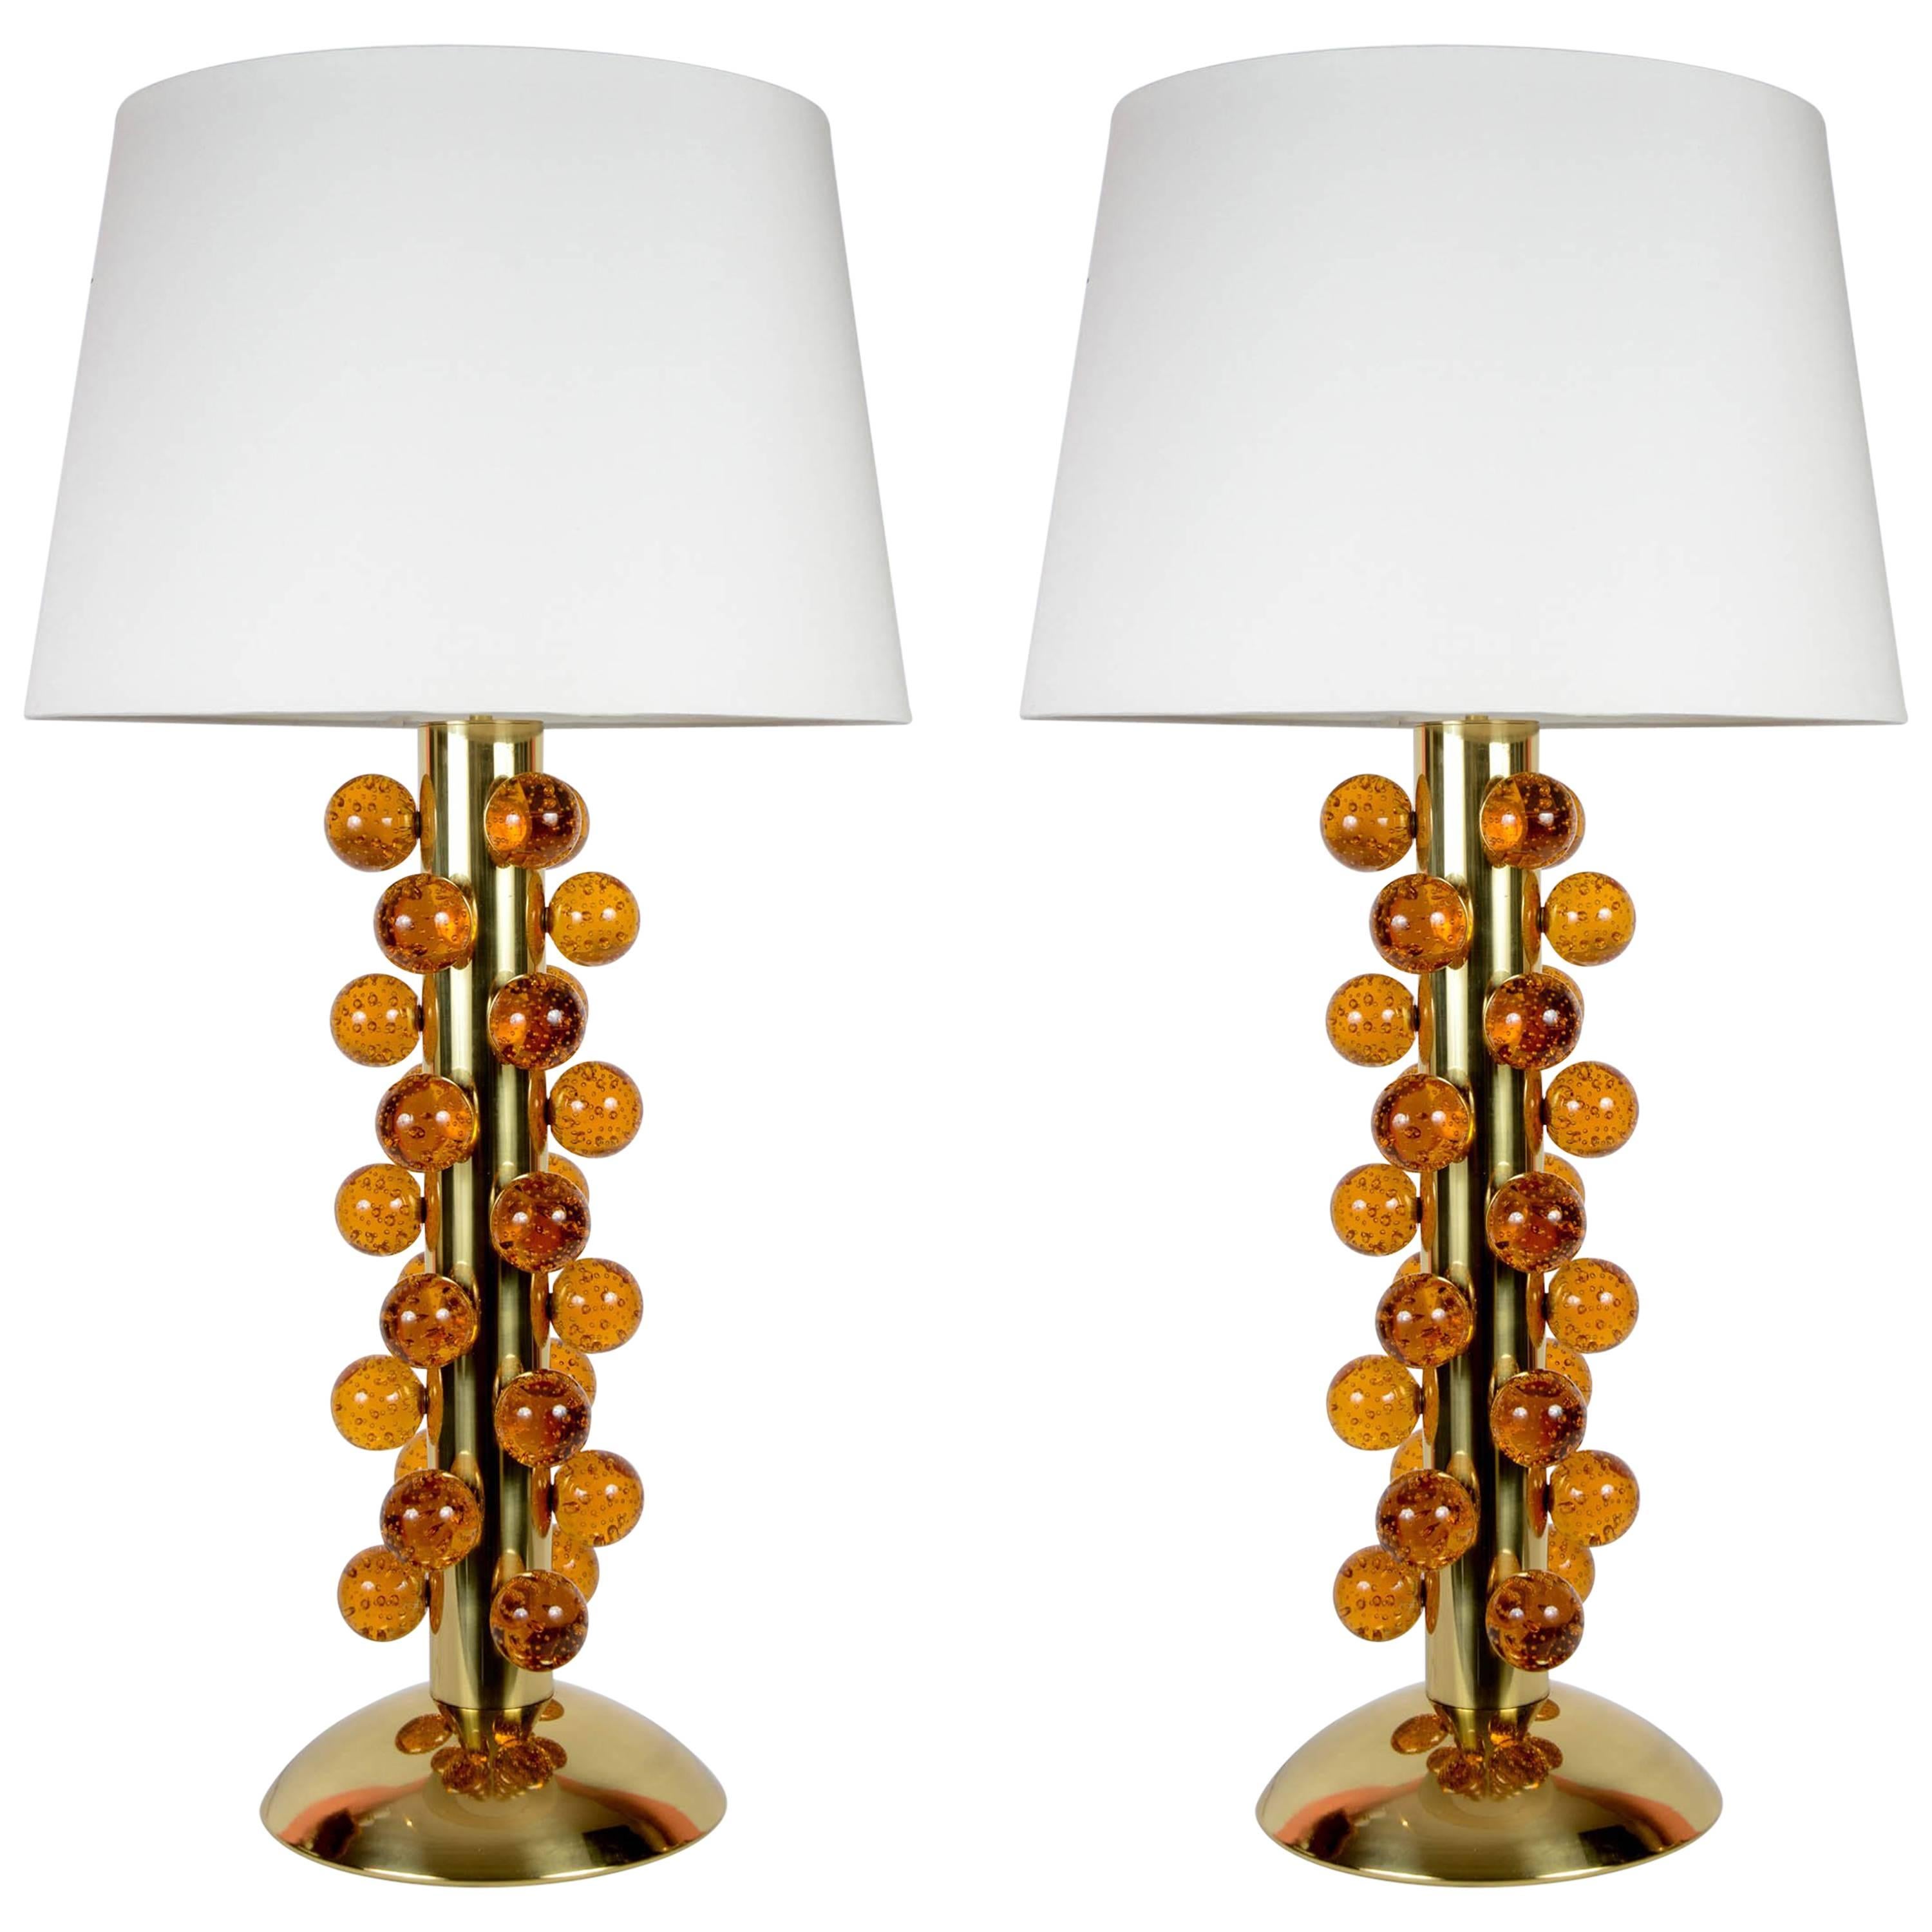 Pair of Murano Glass Lamps by Juanluca Fontana For Sale